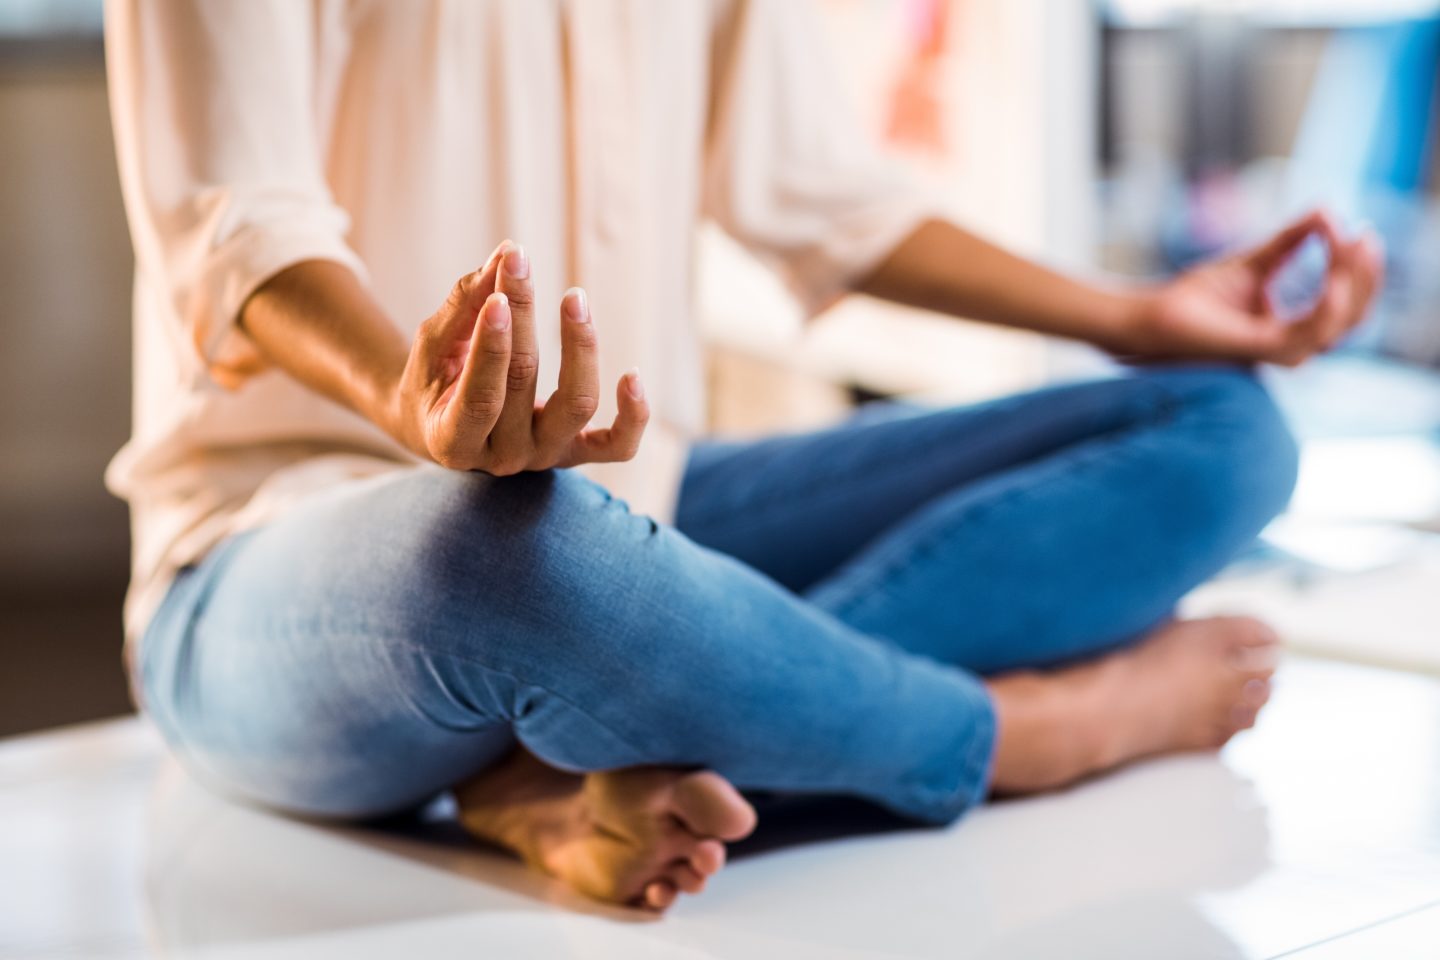 5 Meditations to relieve pandemic anxiety